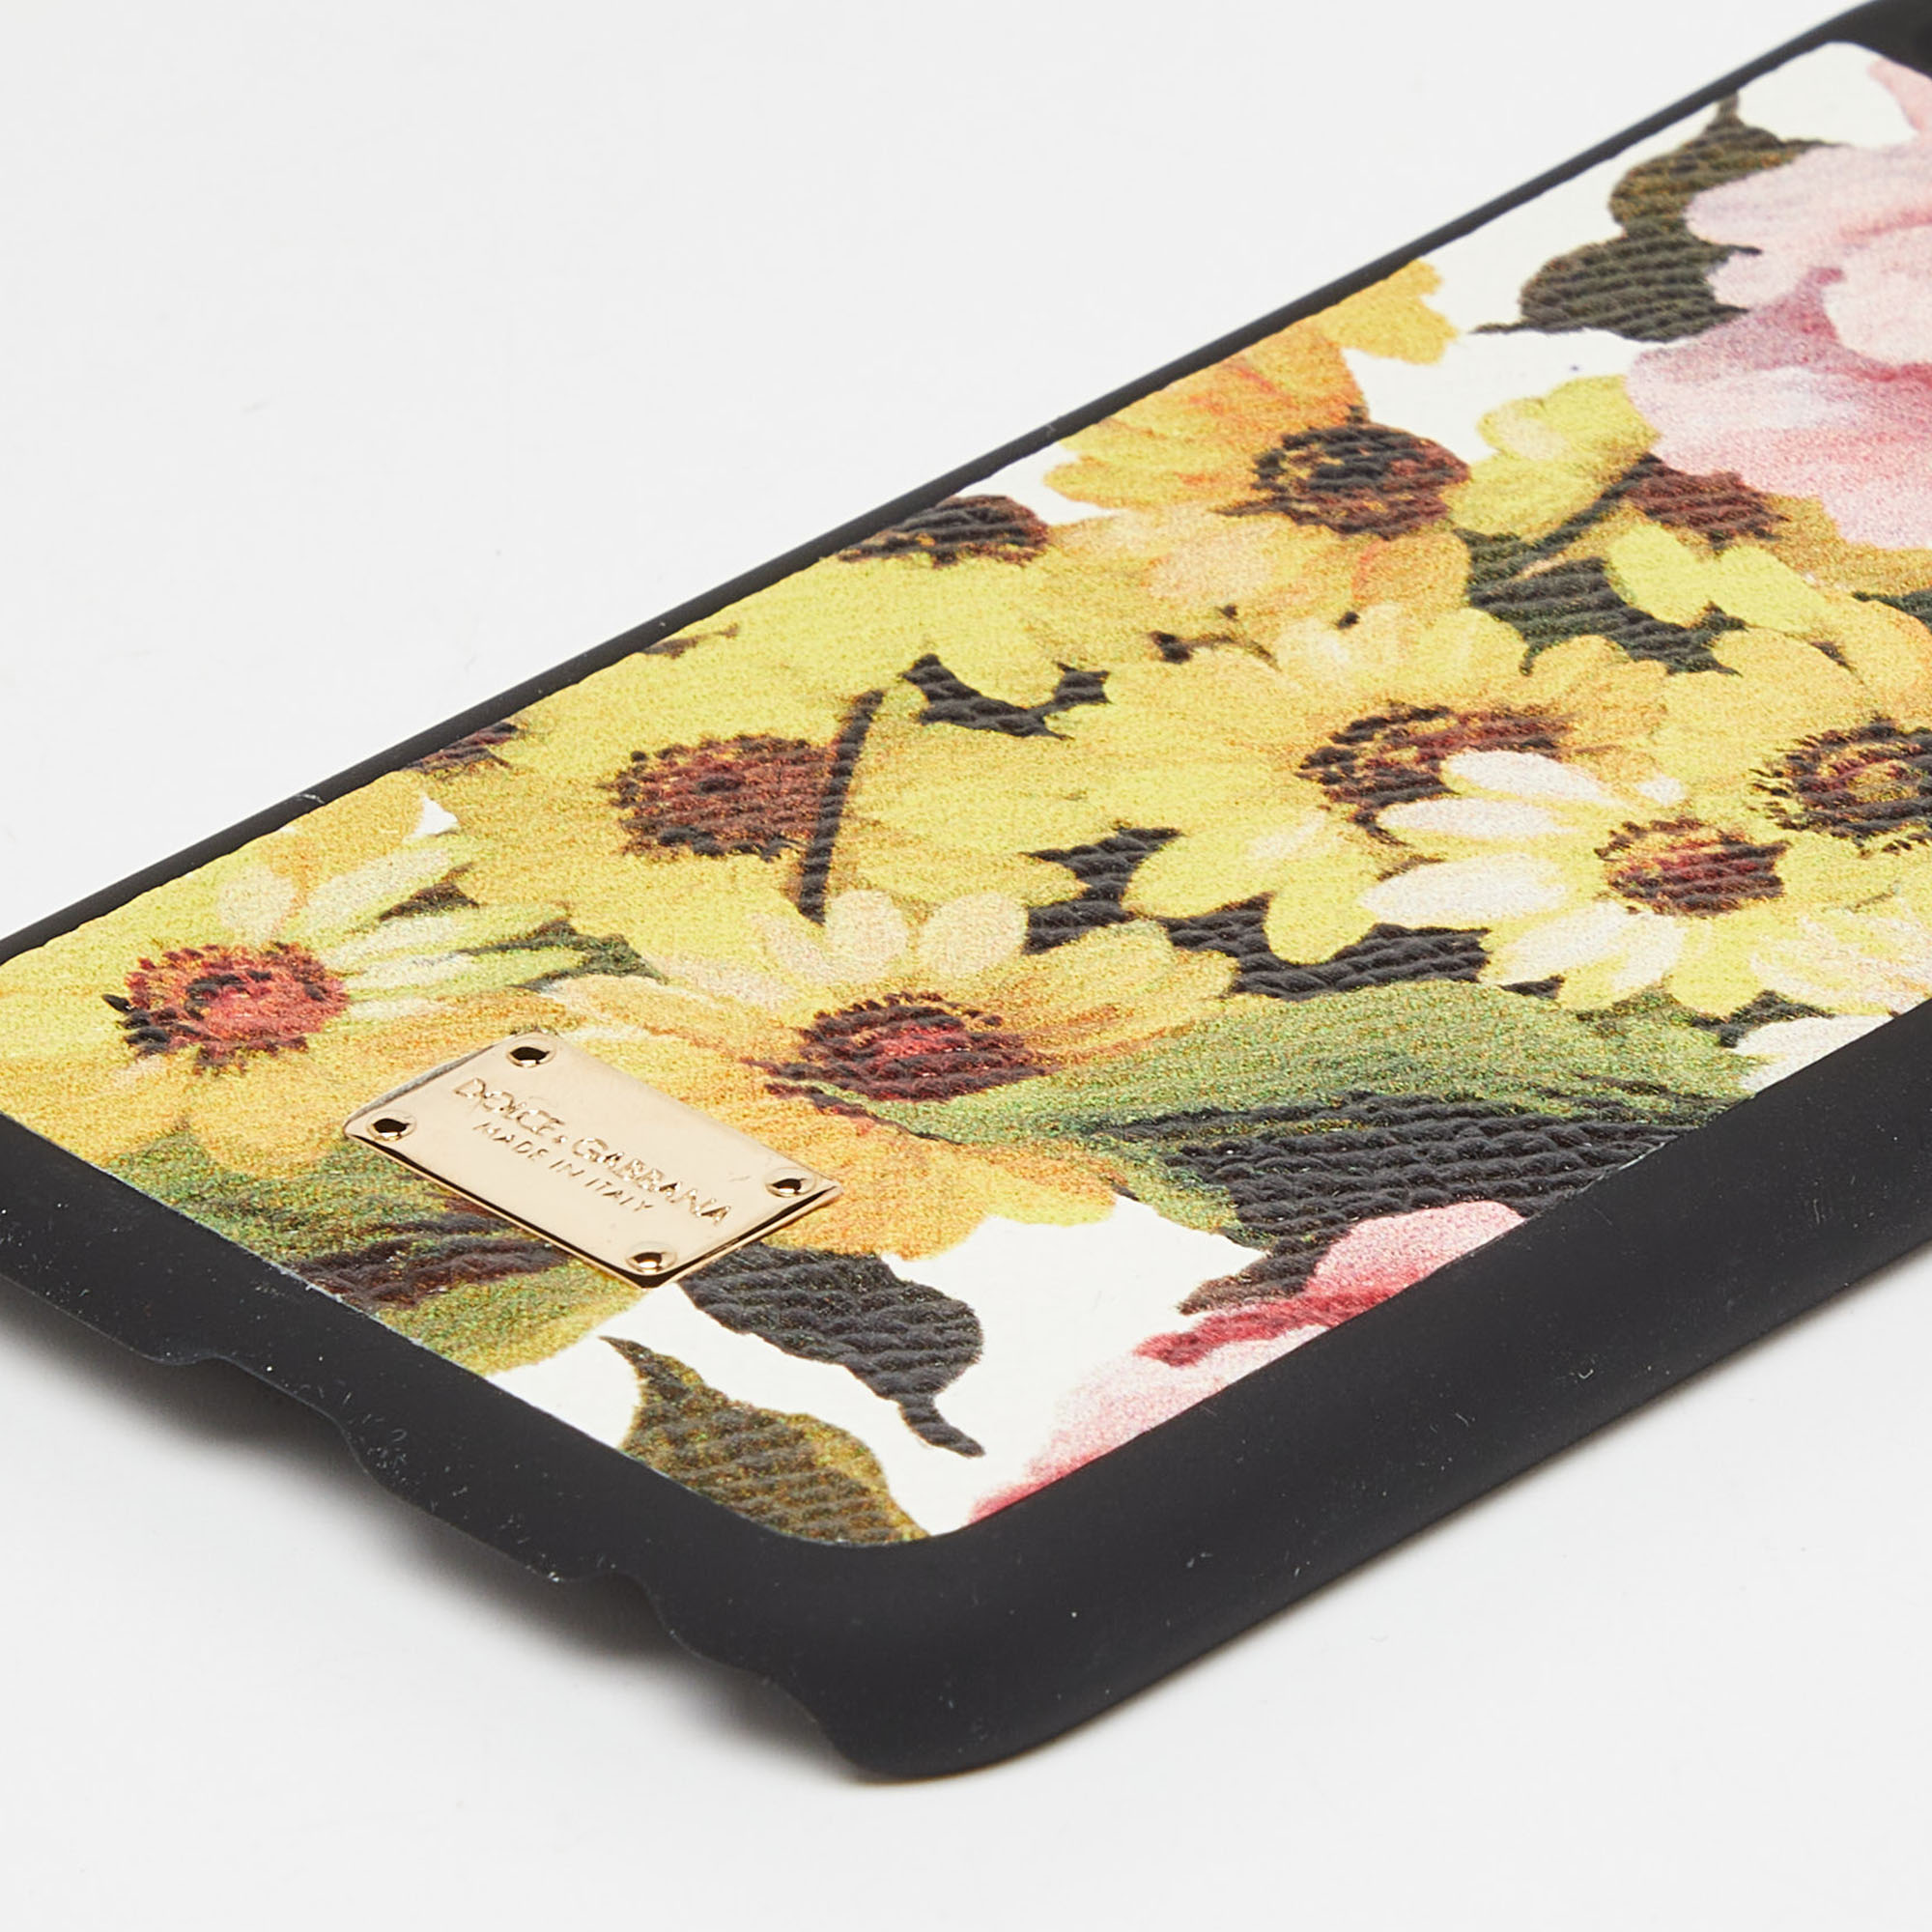 Dolce & Gabbana Multicolor Floral Print Leather IPhone 6 Case